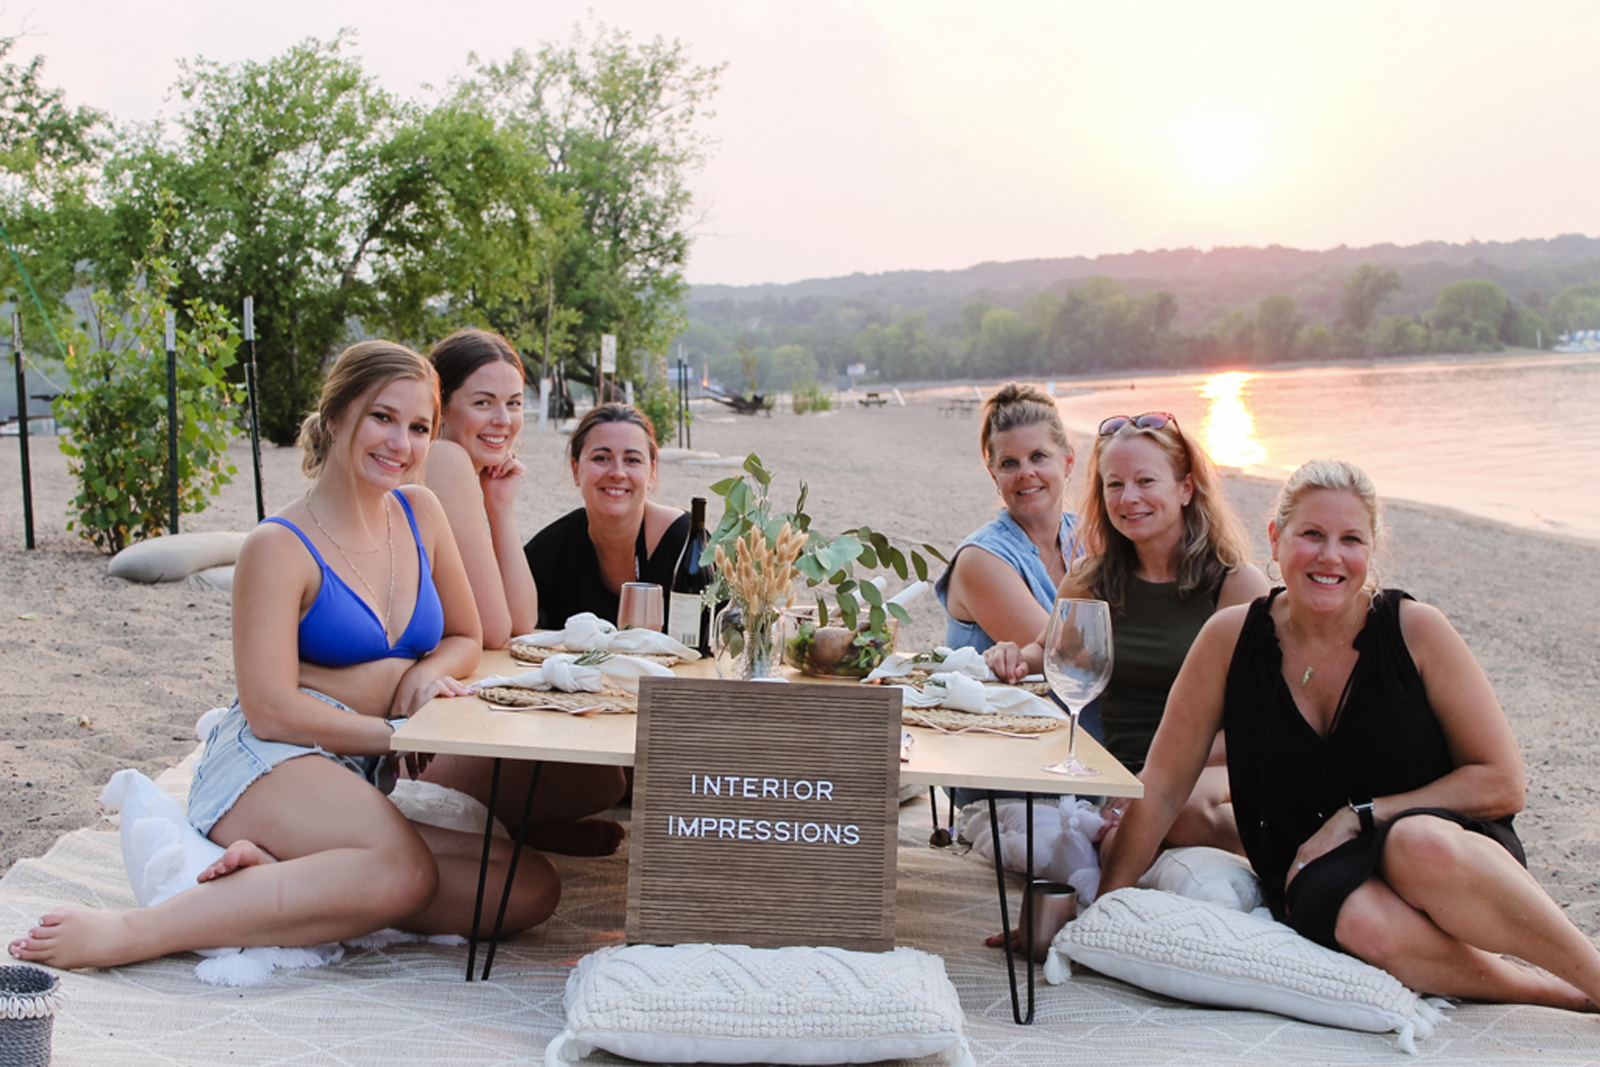 https://interiorimpressions.org/wp-content/uploads/2021/07/Interior-Impressions-Woodbury-MN-Boat-Day-Pillows-and-Prosecco-Picnic-Team-Photo.jpg